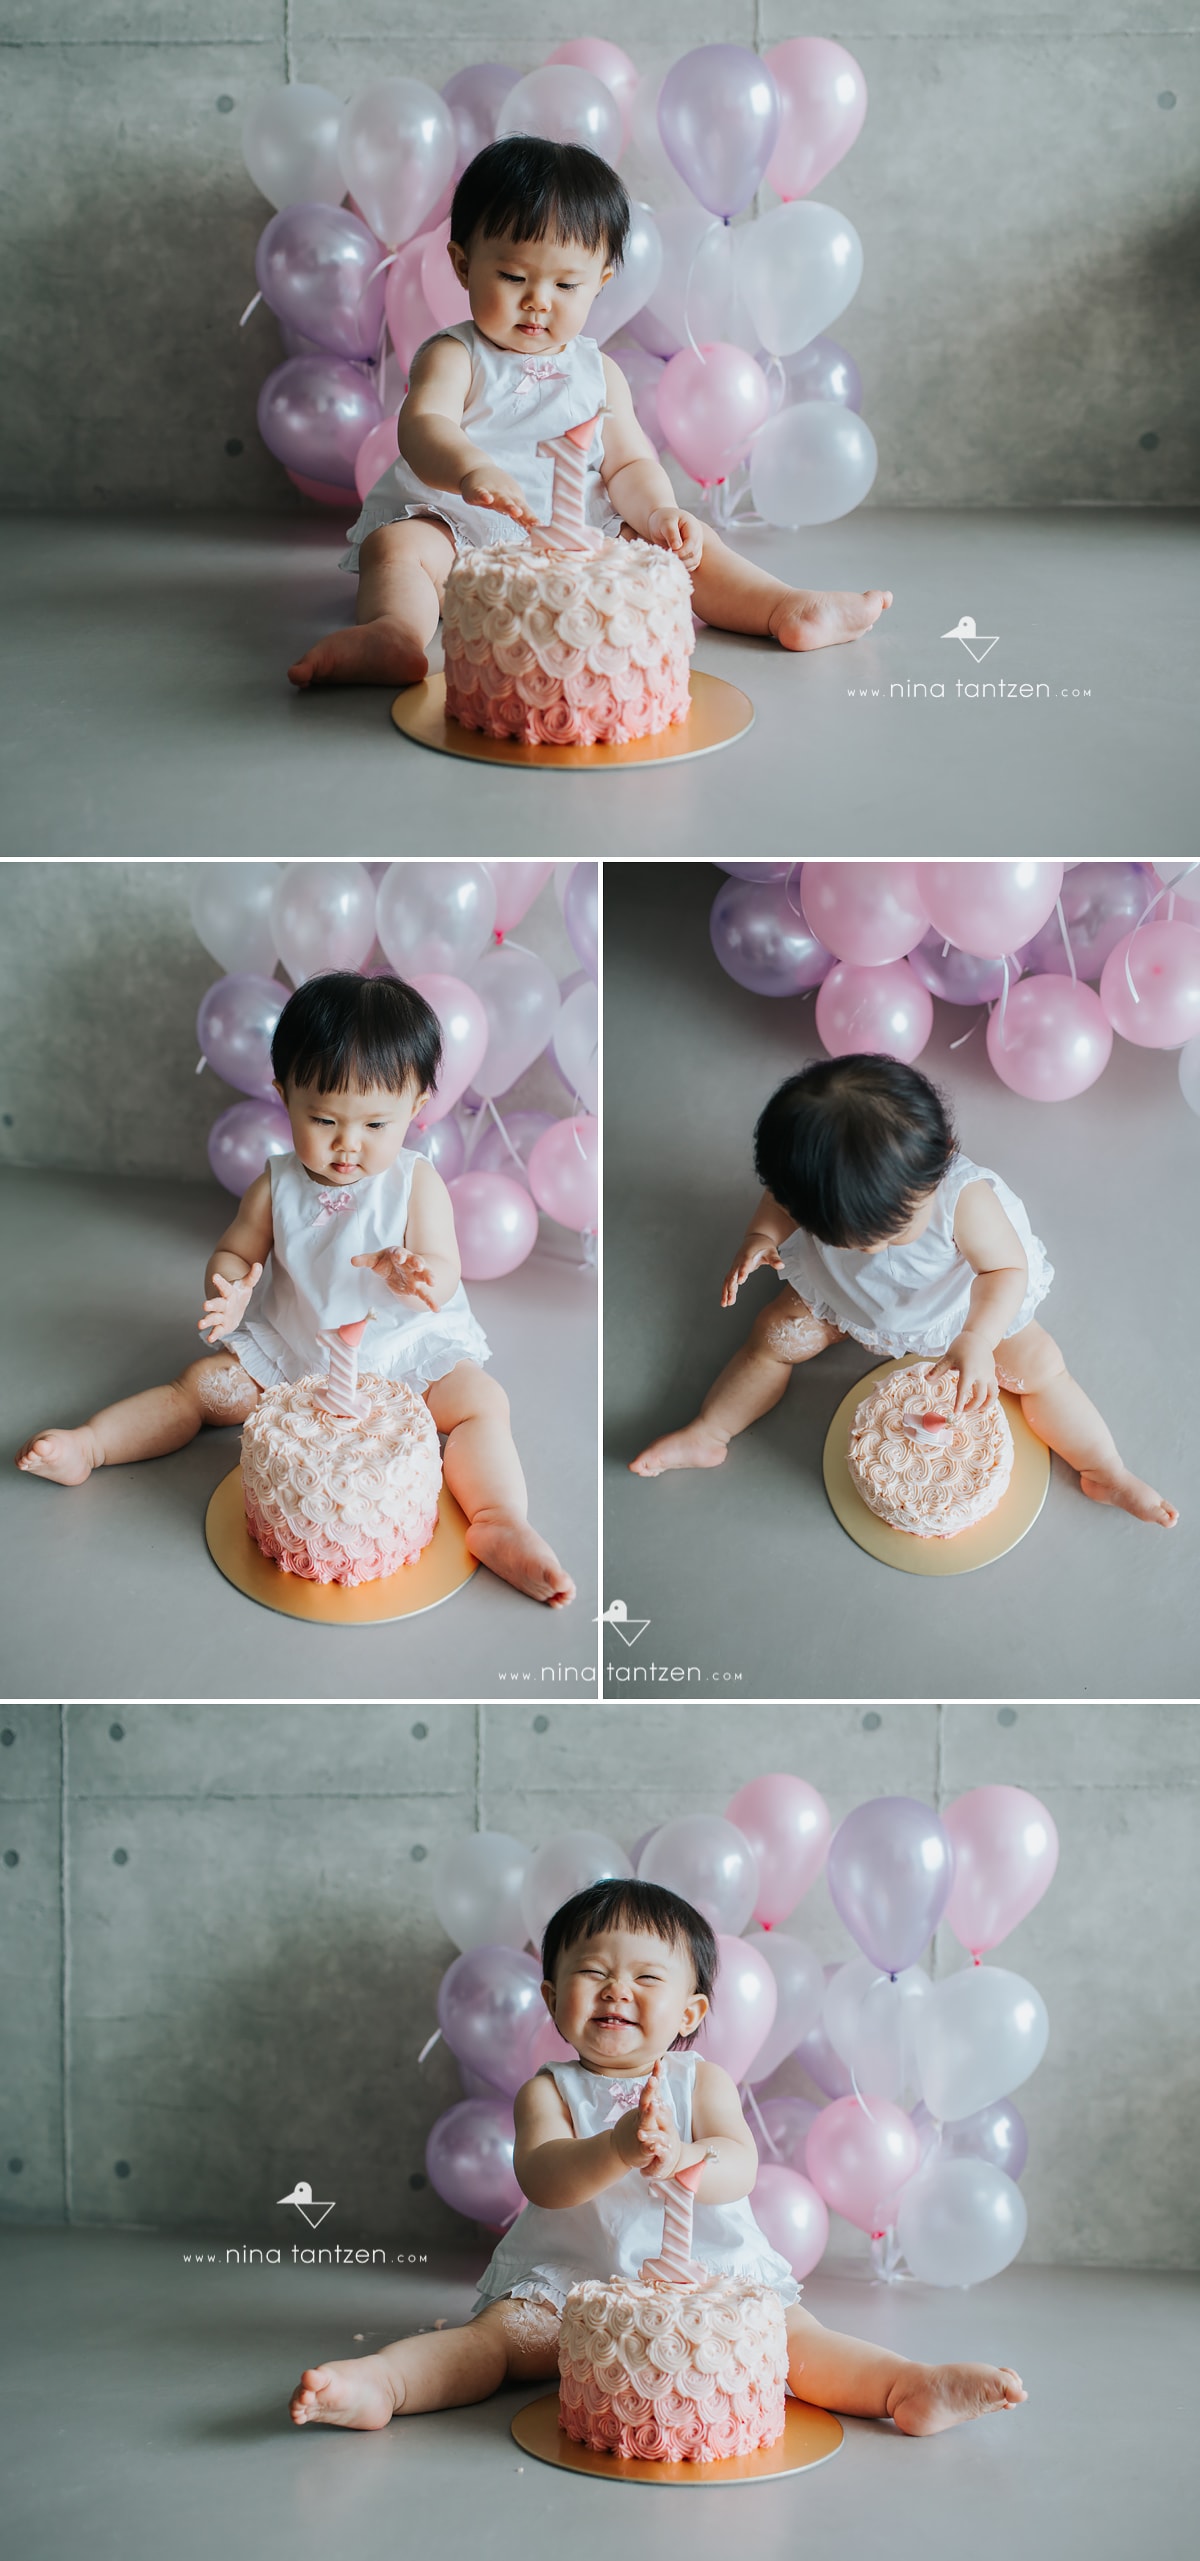 cake smash photo session for baby's first birthday